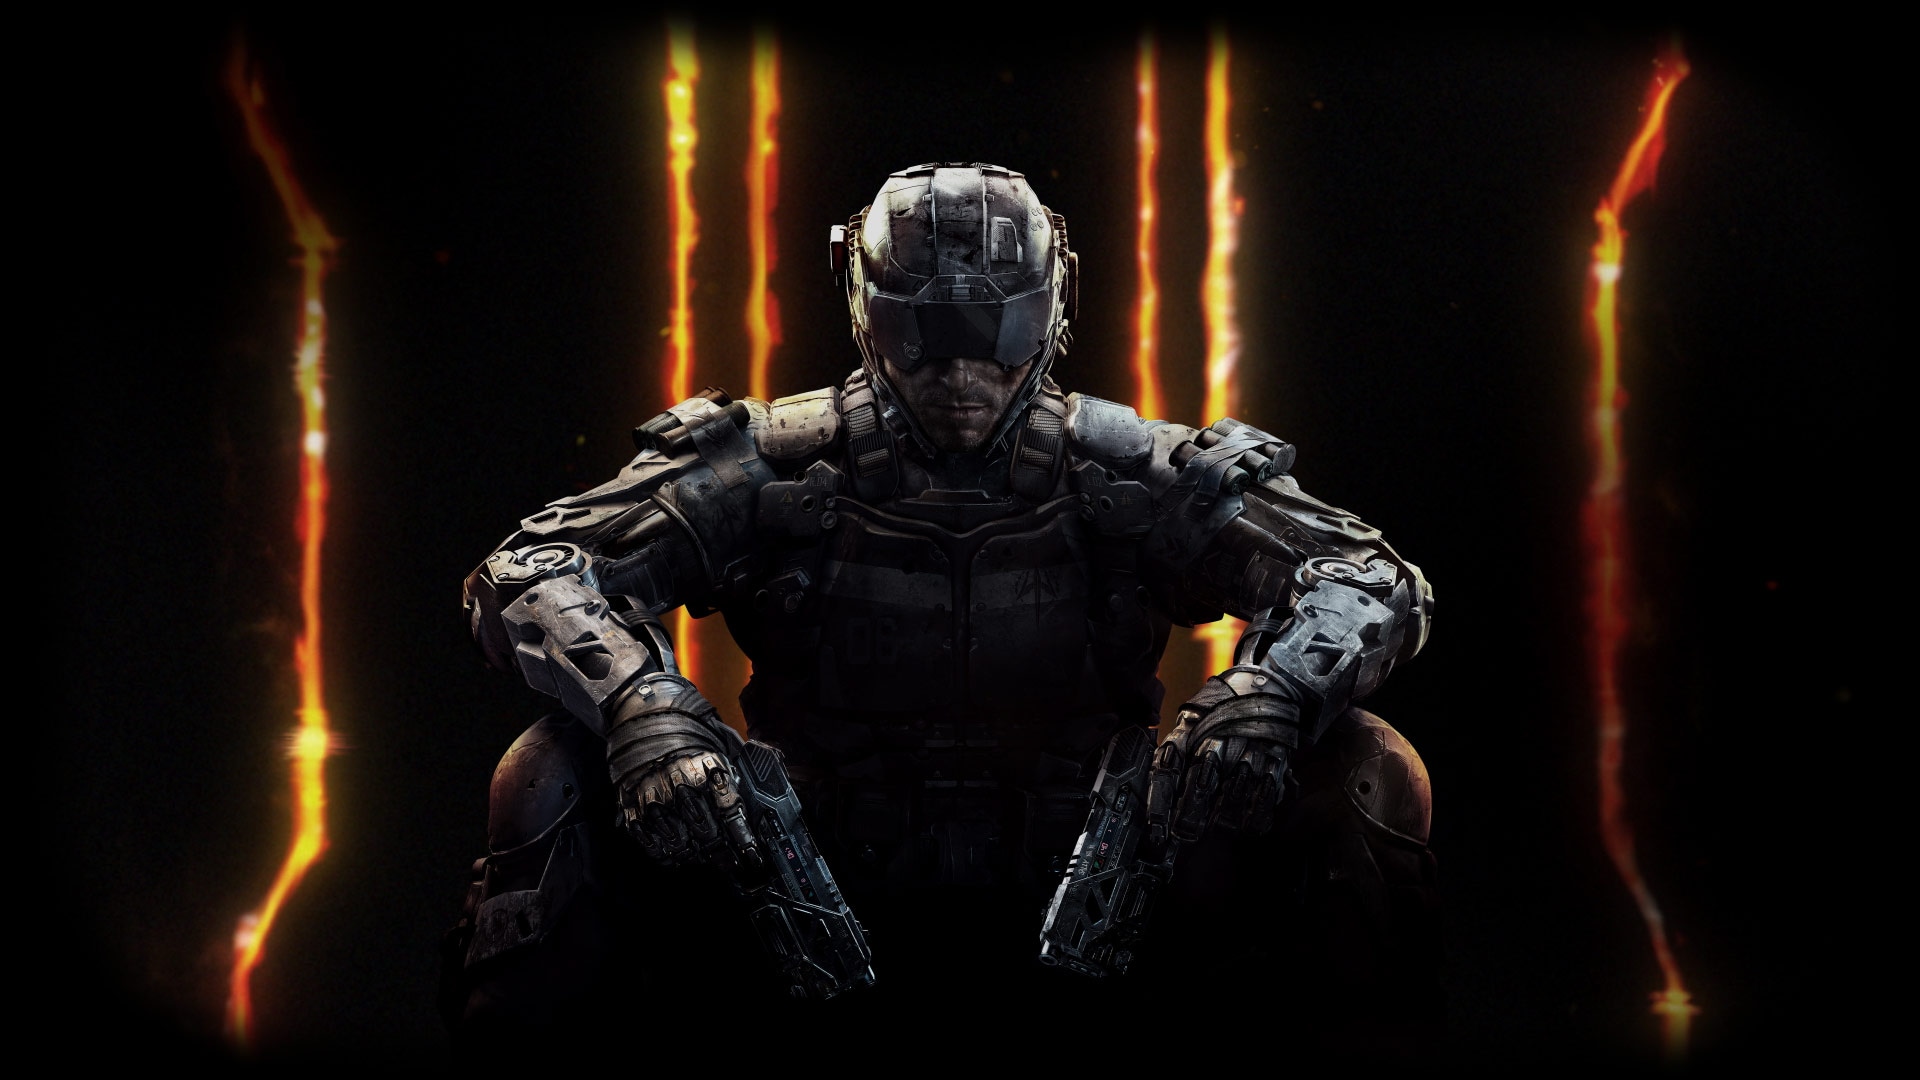 call of duty: black ops iii, call of duty, video game